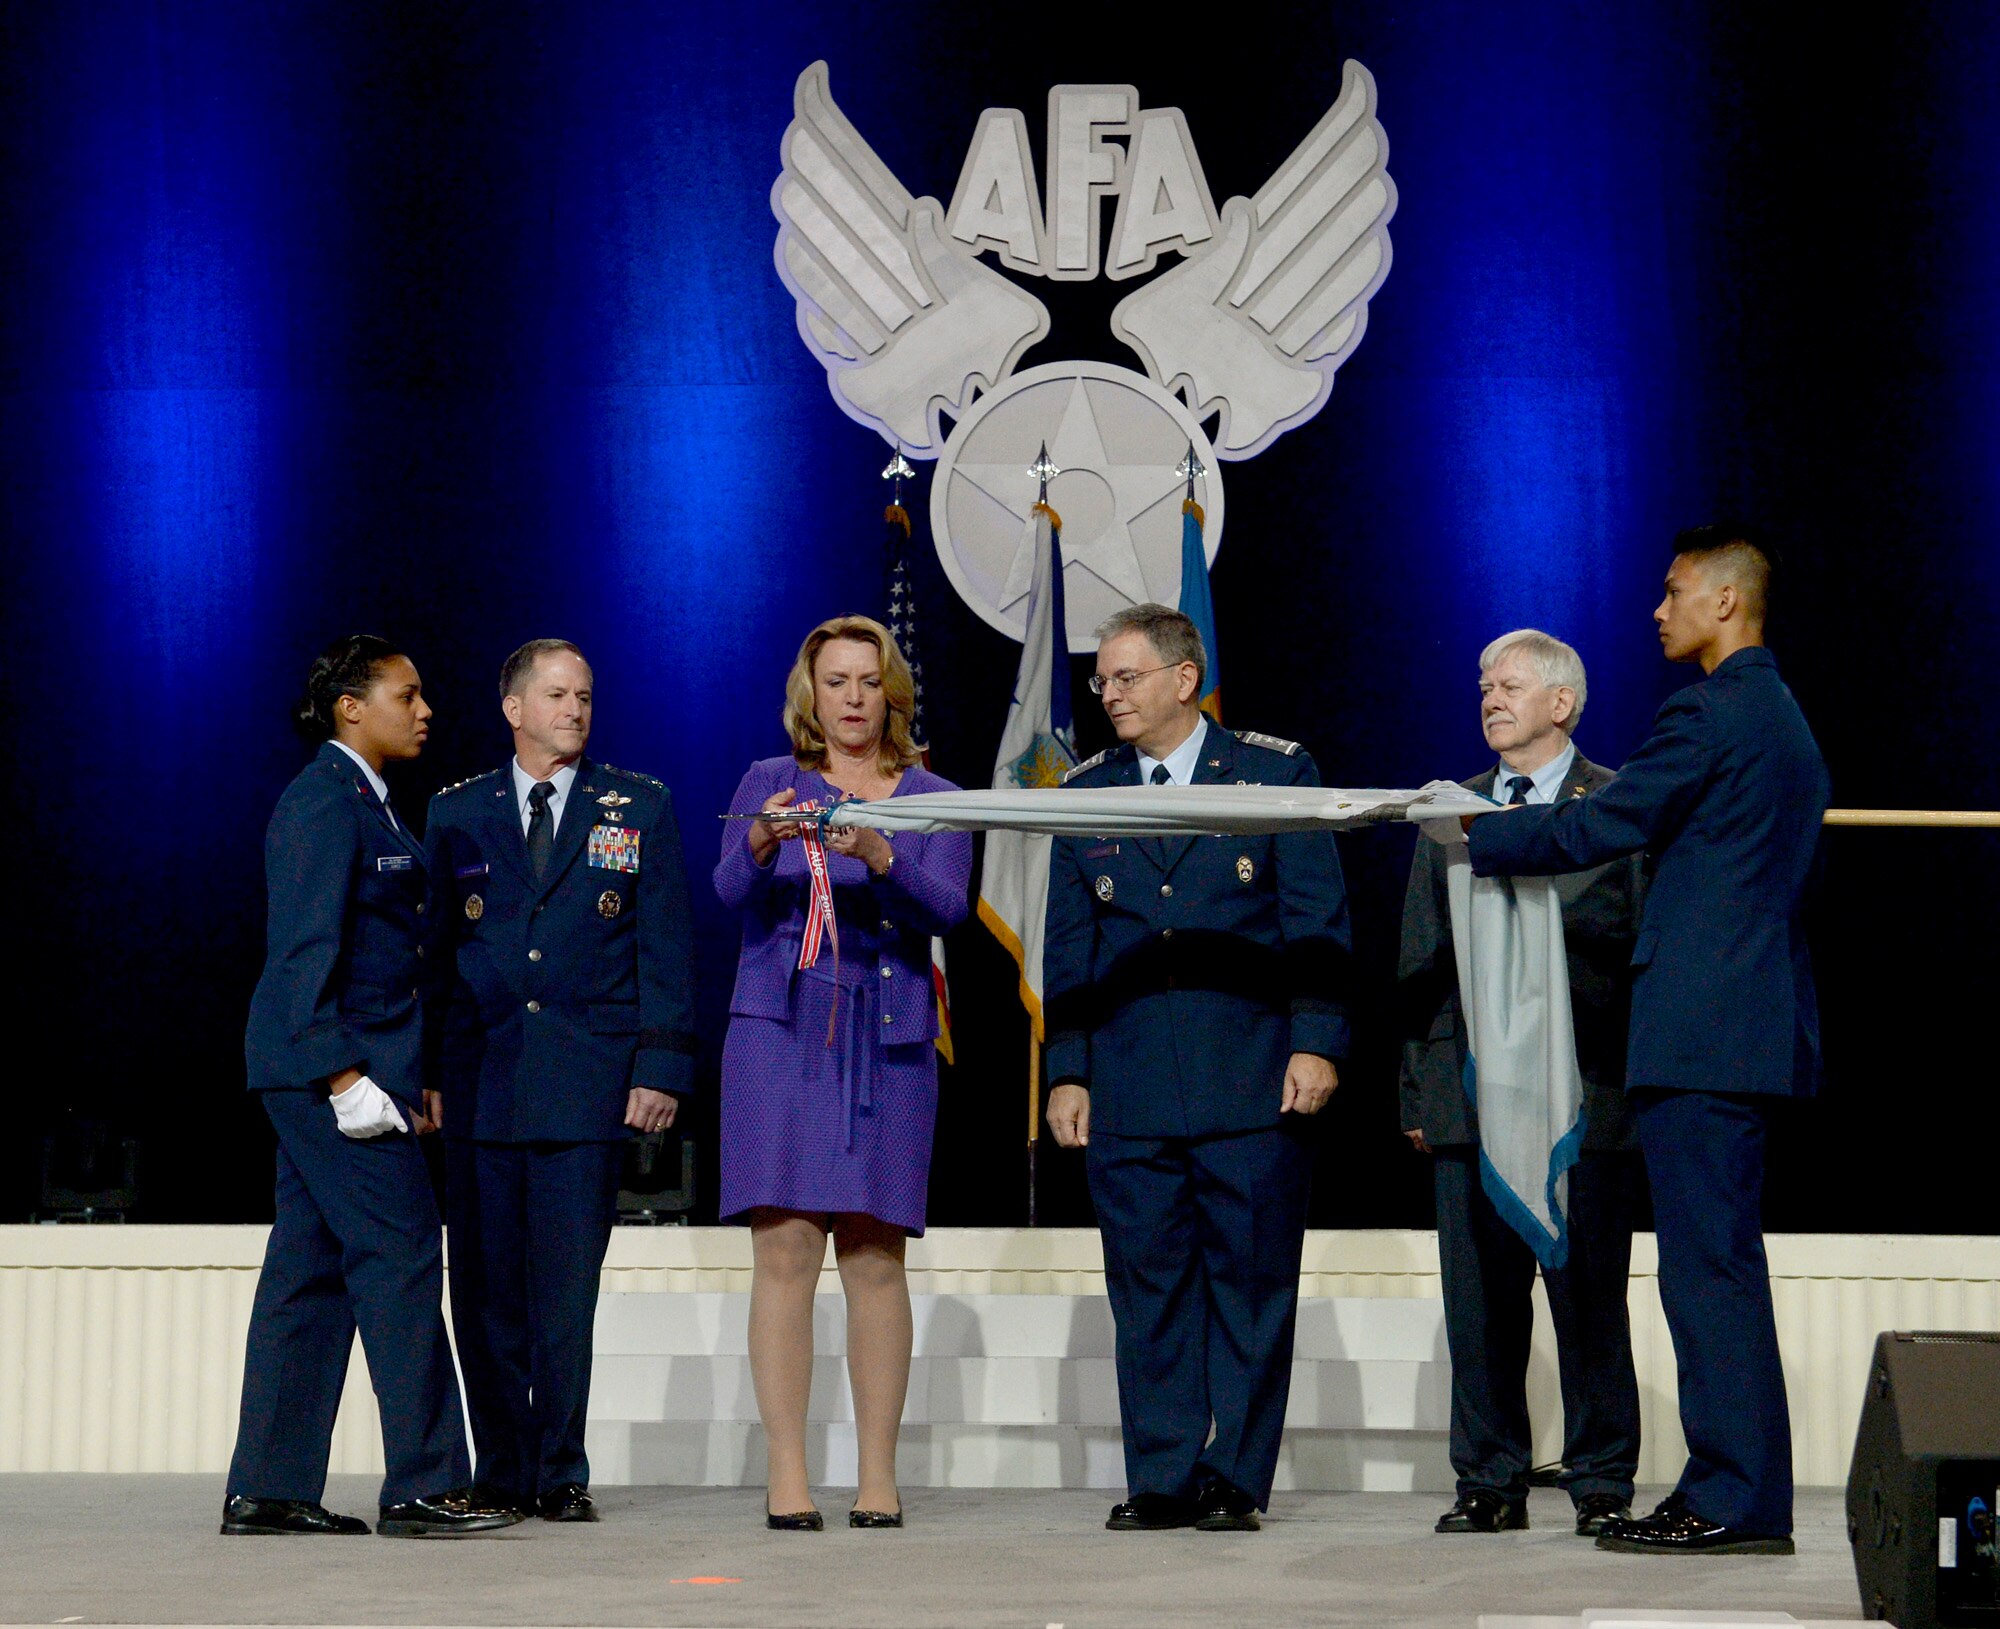 Maj. Gen. Joseph Vazquez, the Civil Air Patrol national commander, accepts the Air Force Organizational Excellence Award on behalf of the CAP from Air Force Secretary Deborah Lee James and Air Force Chief of Staff Gen. Dave Goldfein during the Air Force Association's Air, Space and Cyber Conference in National Harbor, Md., Sept. 20, 2016.  (U.S. Air Force photo/Scott M. Ash)